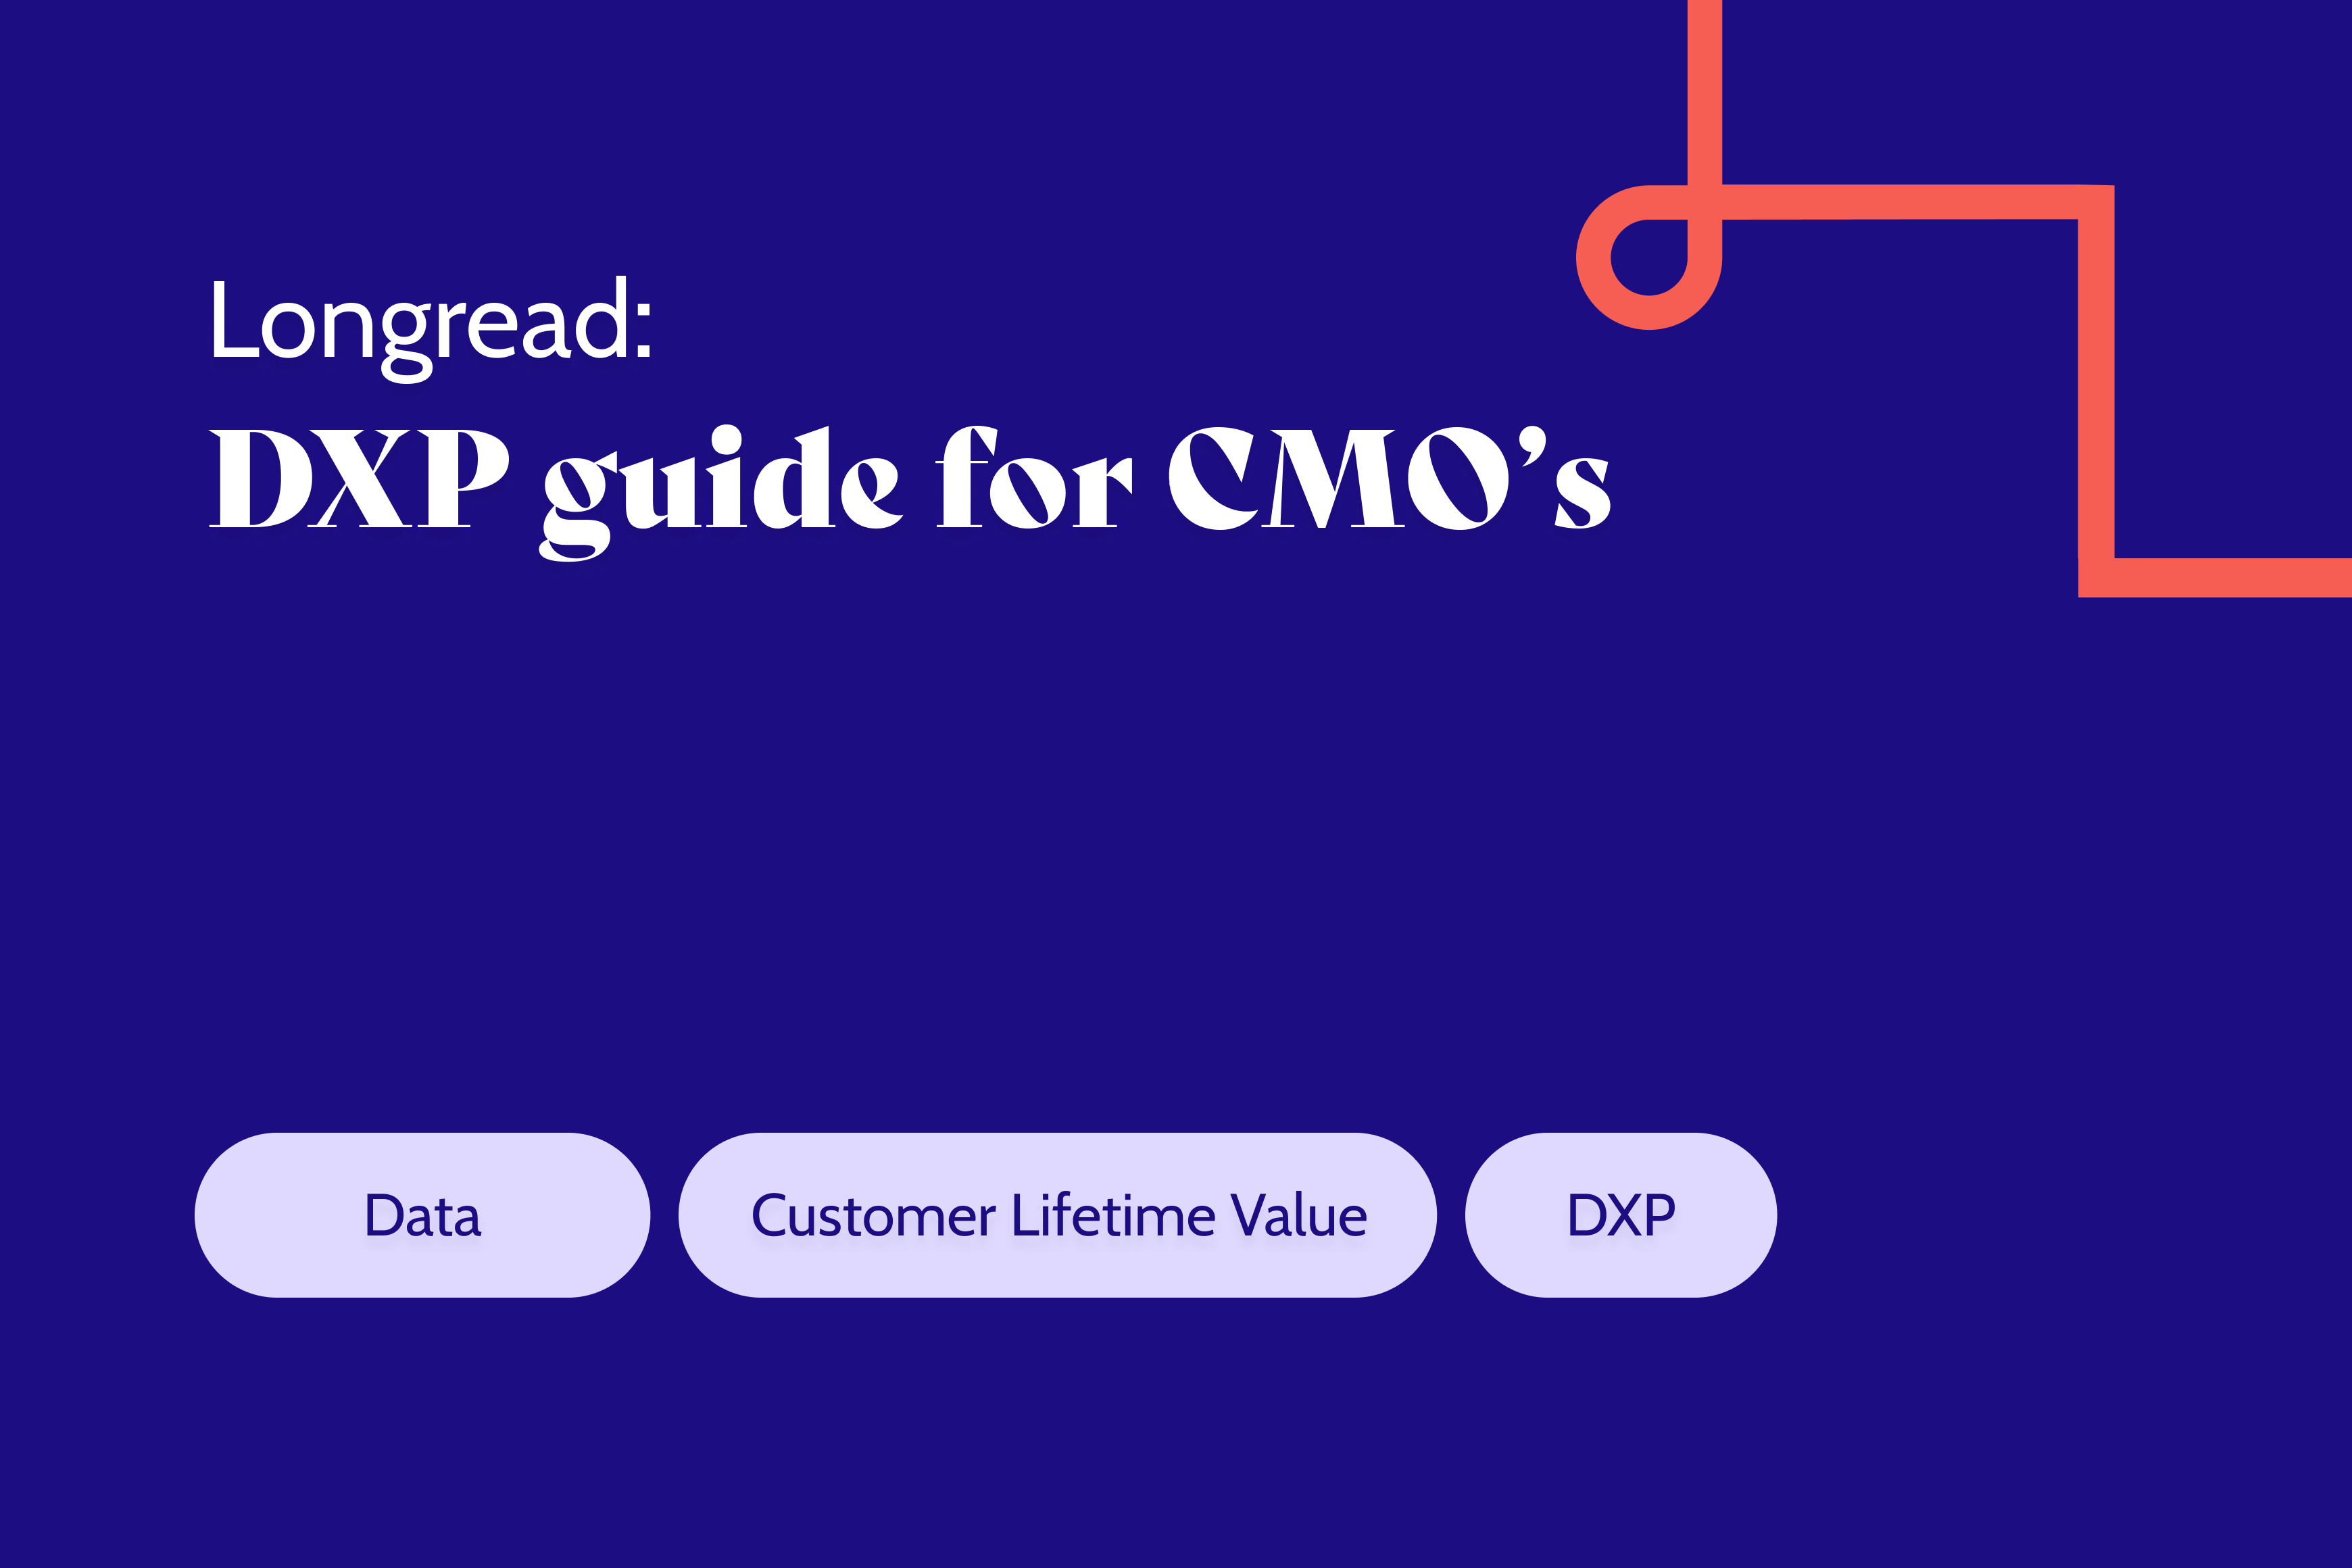 DXP guide for CMO’s